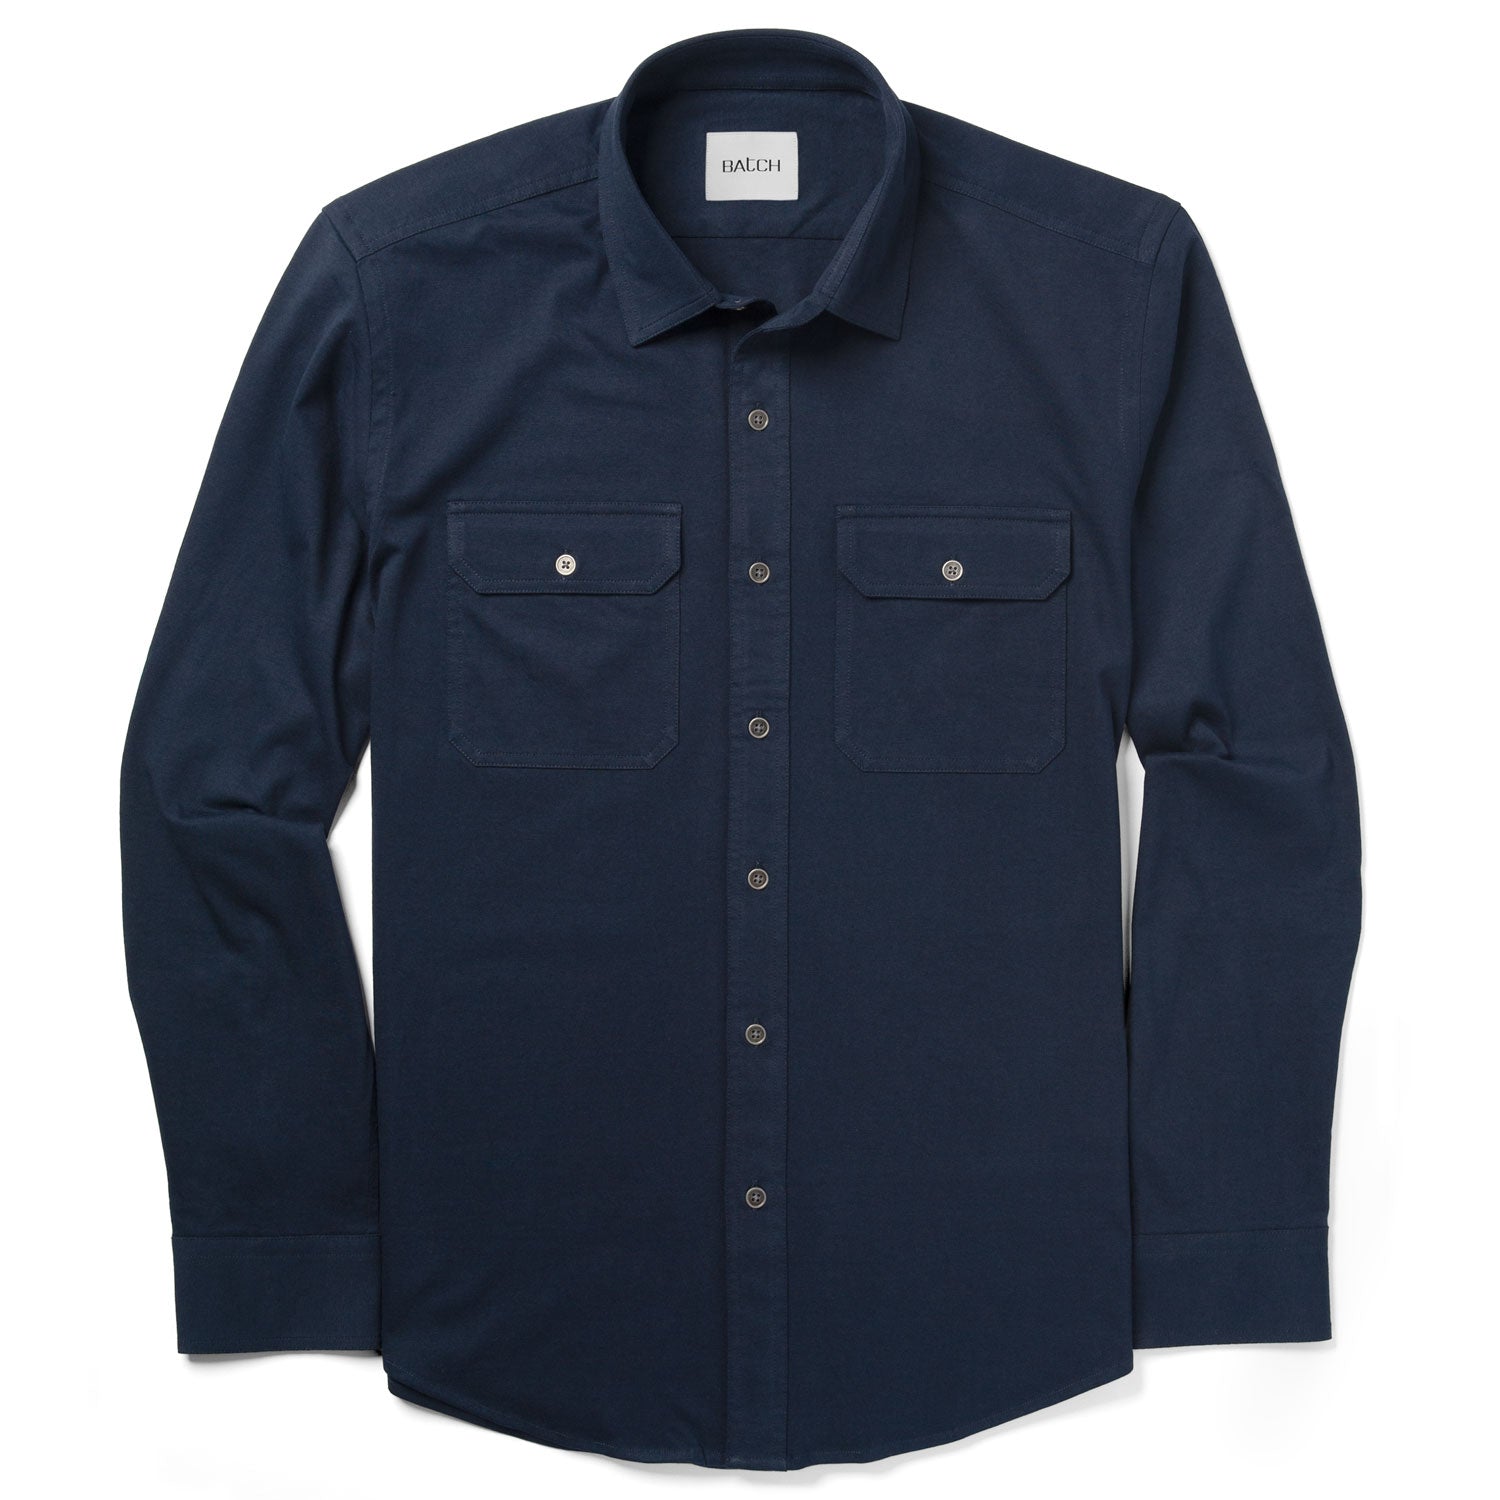 Constructor Knit Utility Shirt – Navy Cotton Jersey